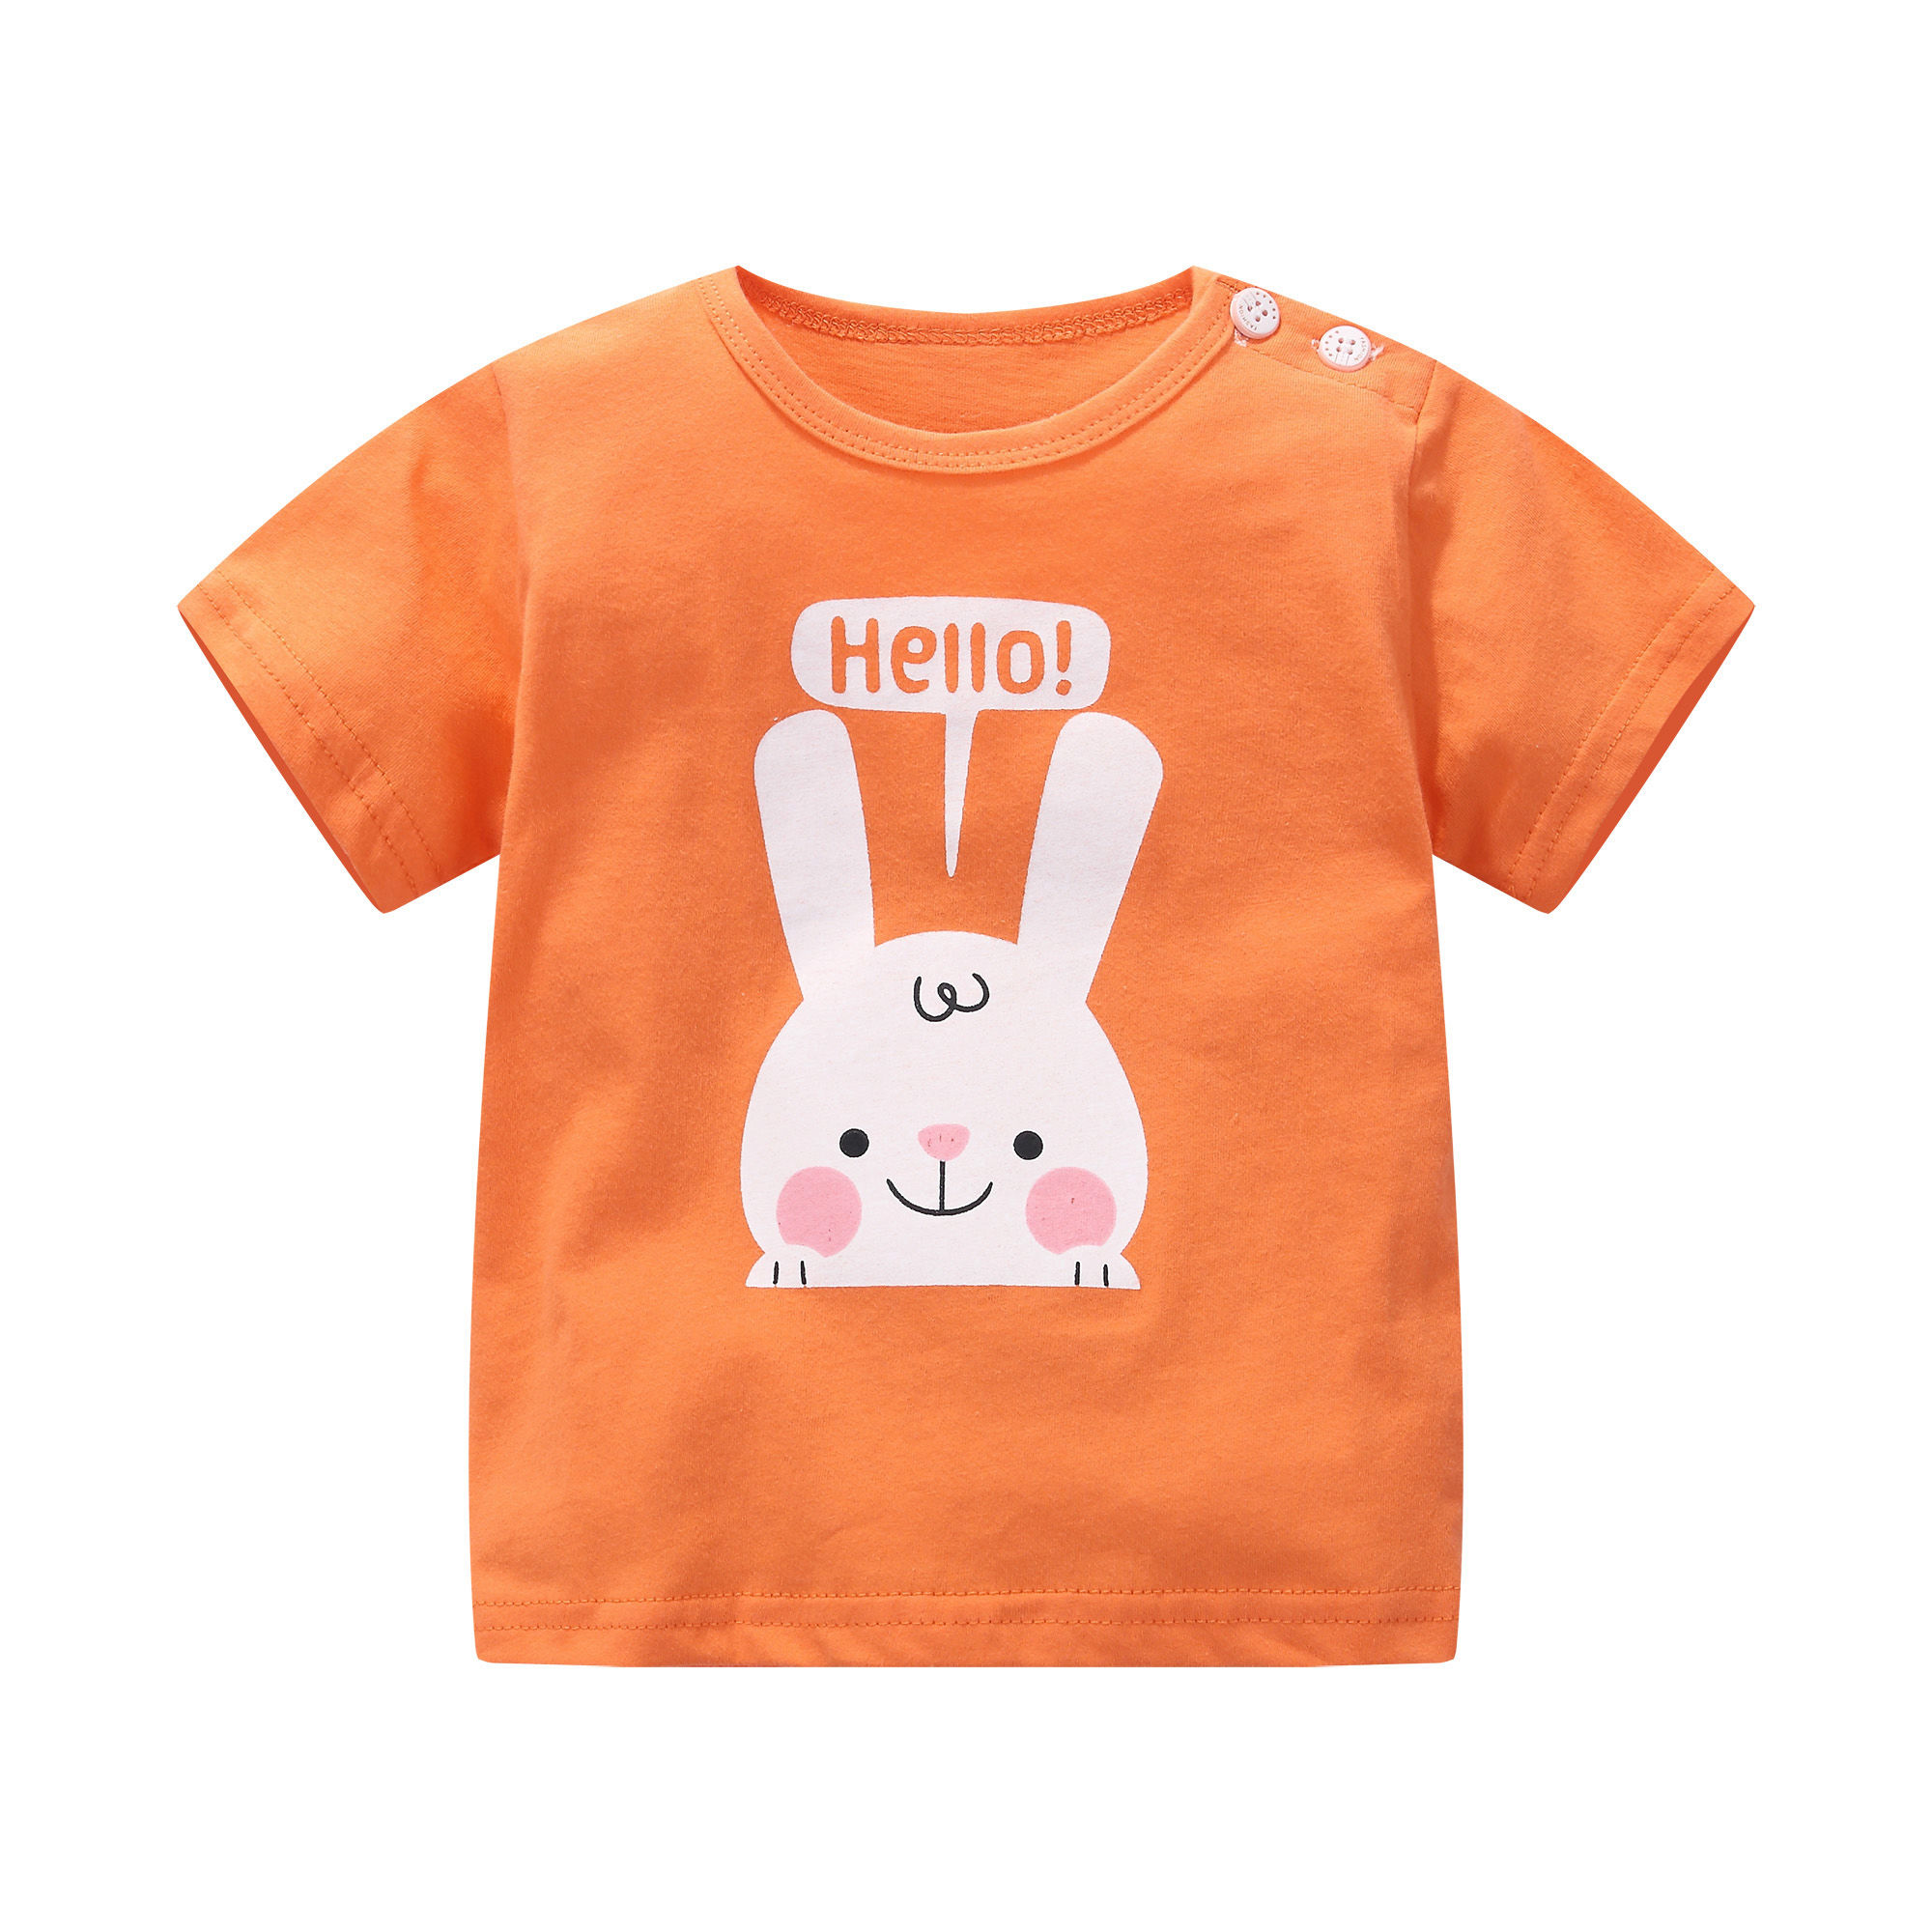 100% cotton tee for girls | orange tee for kids | toddle tee with cute rabbit